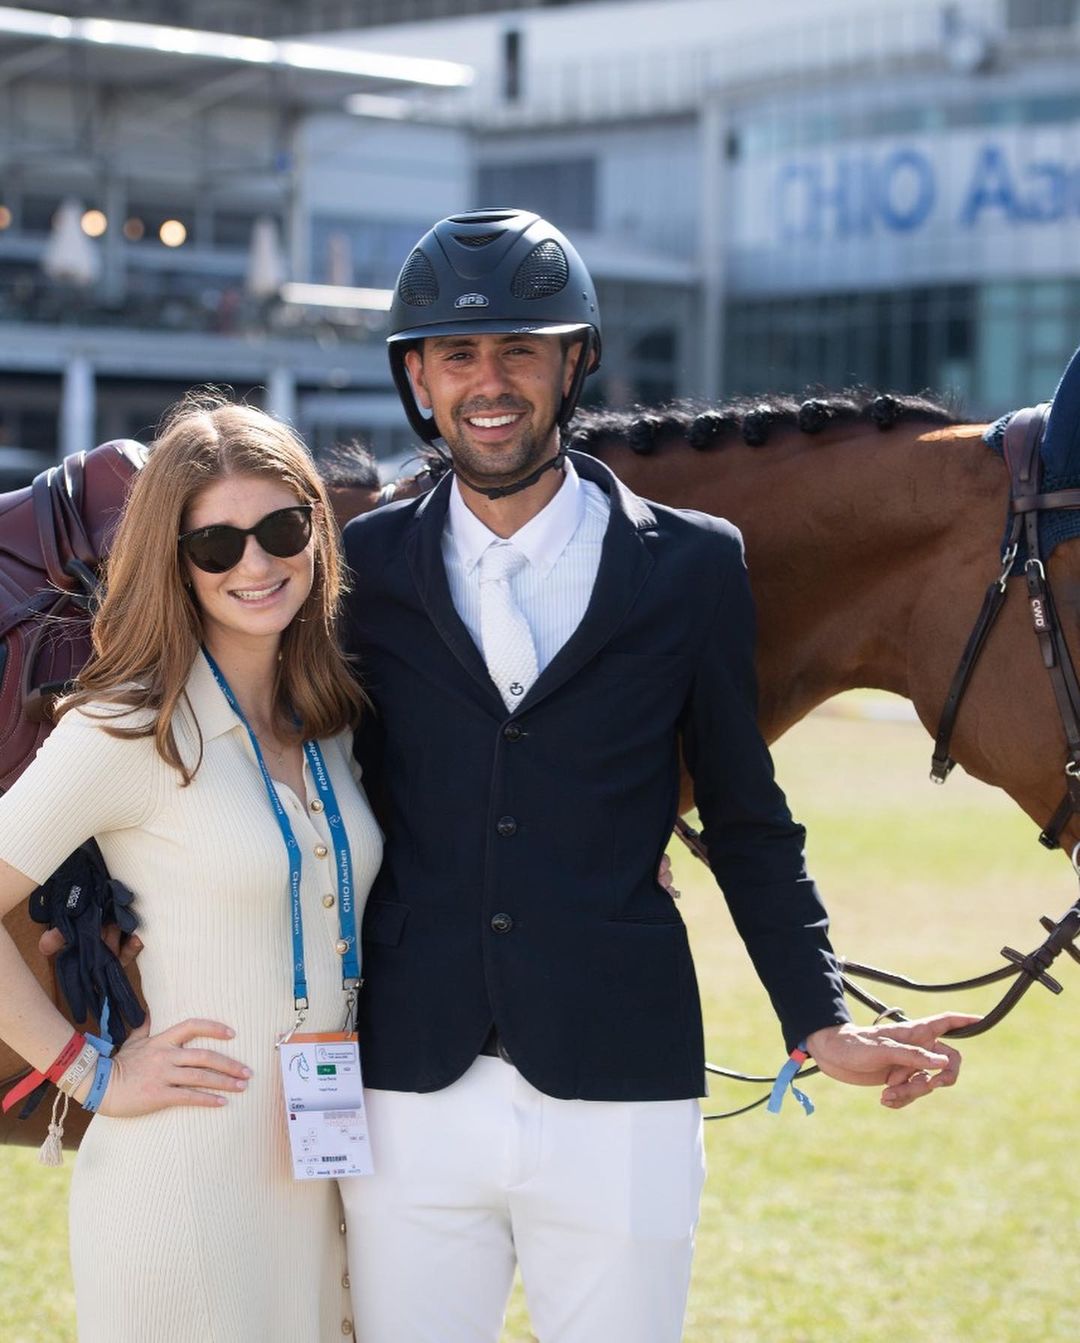 Nayel Nassar is an Olympic equestrian from Egypt